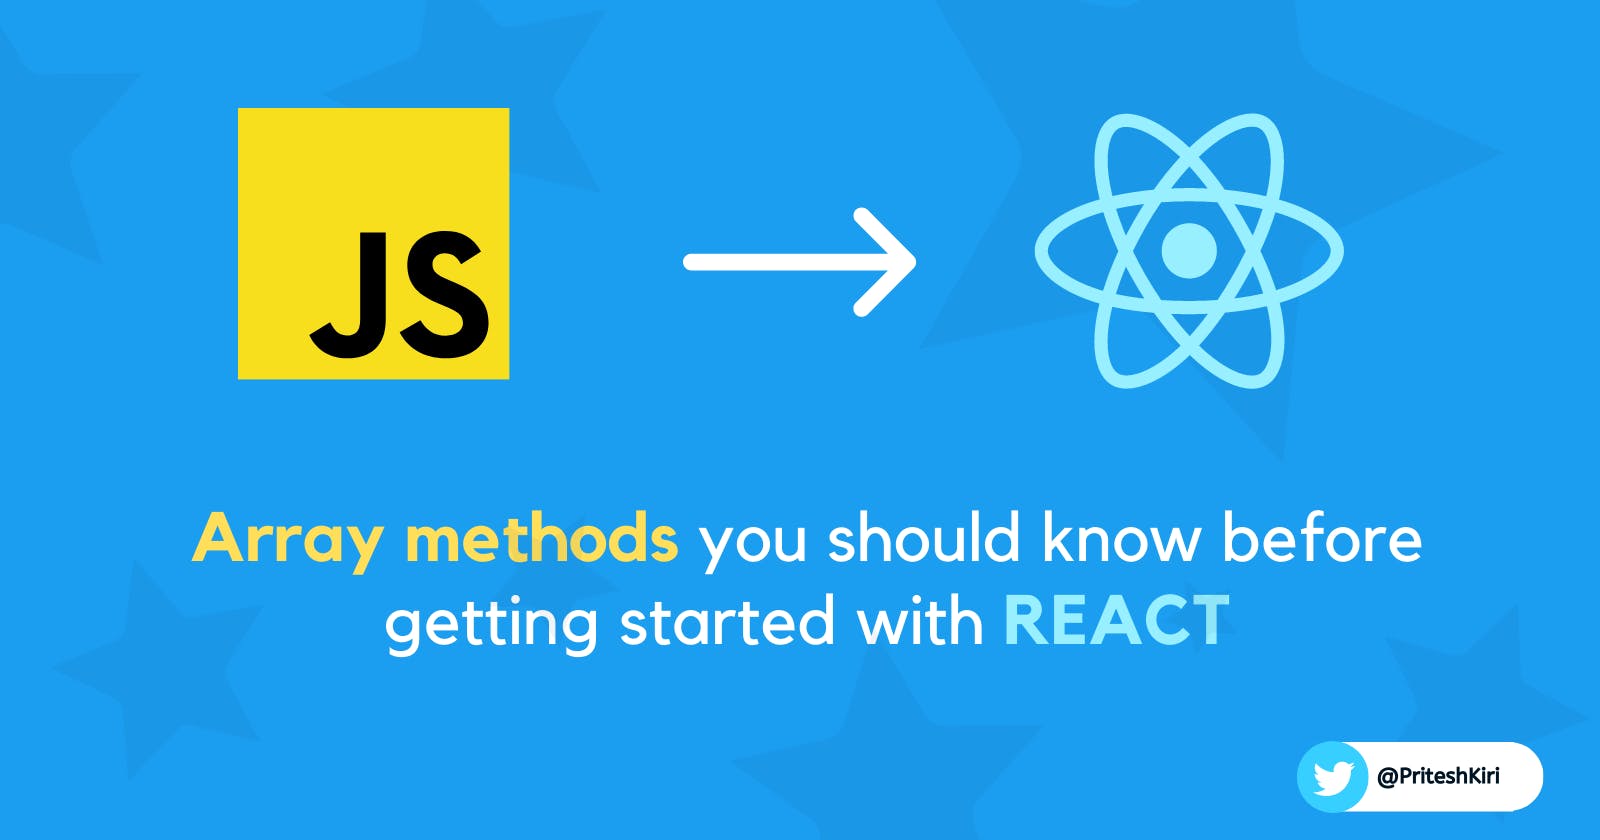 Array methods you should know before getting started with React